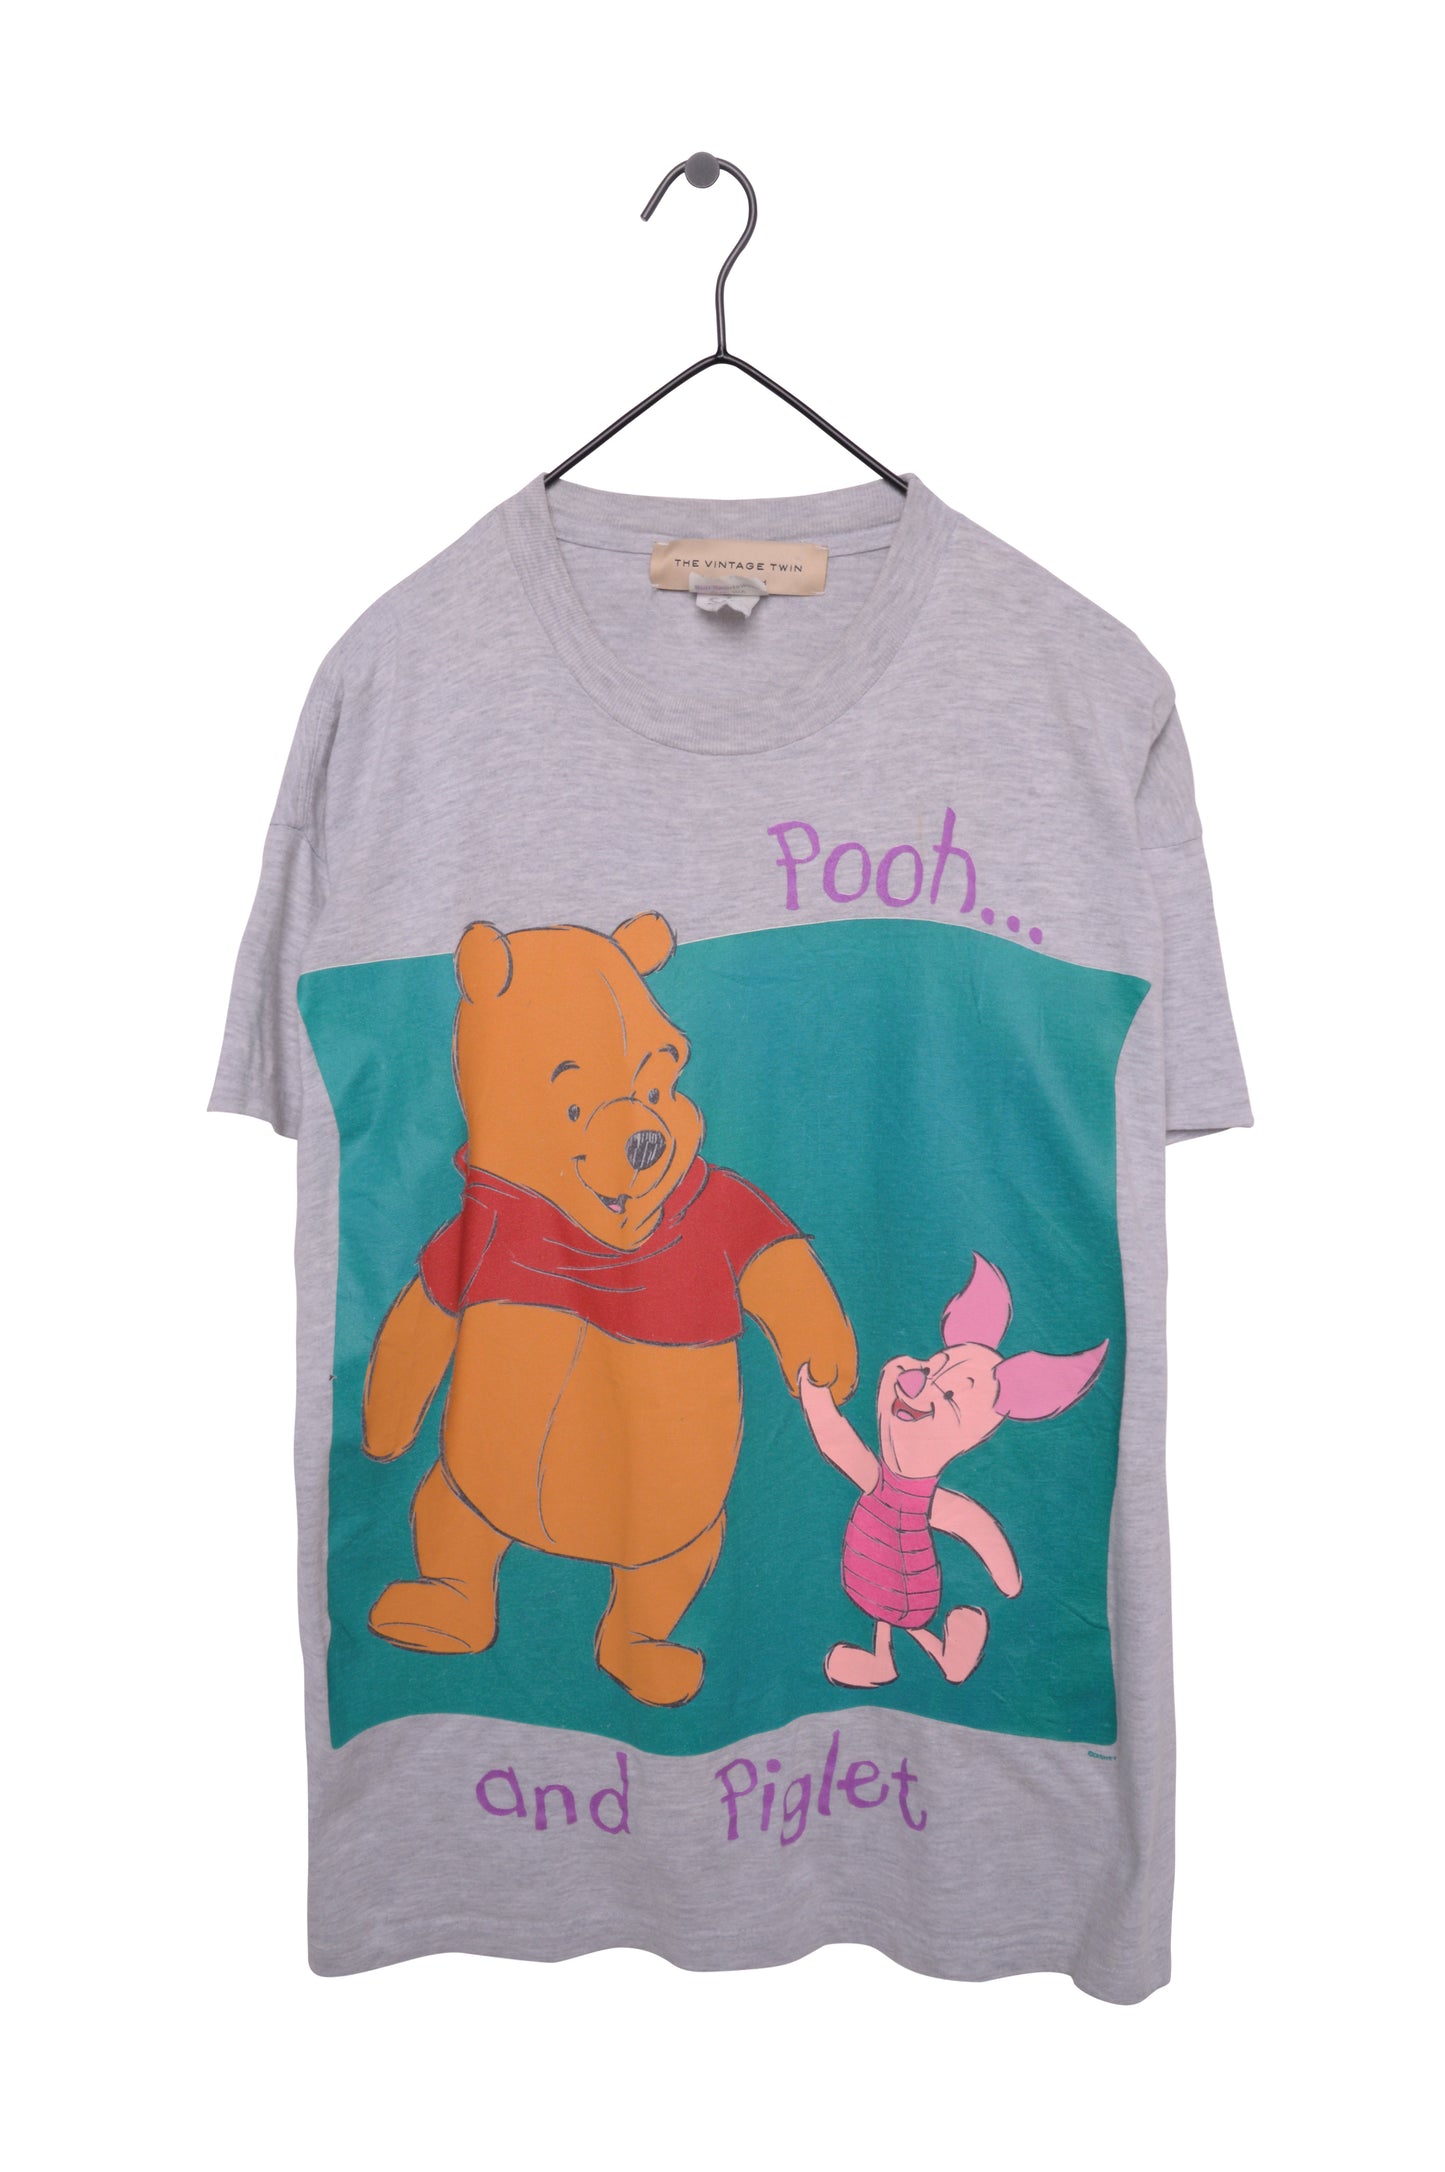 Pooh and Piglet Tee